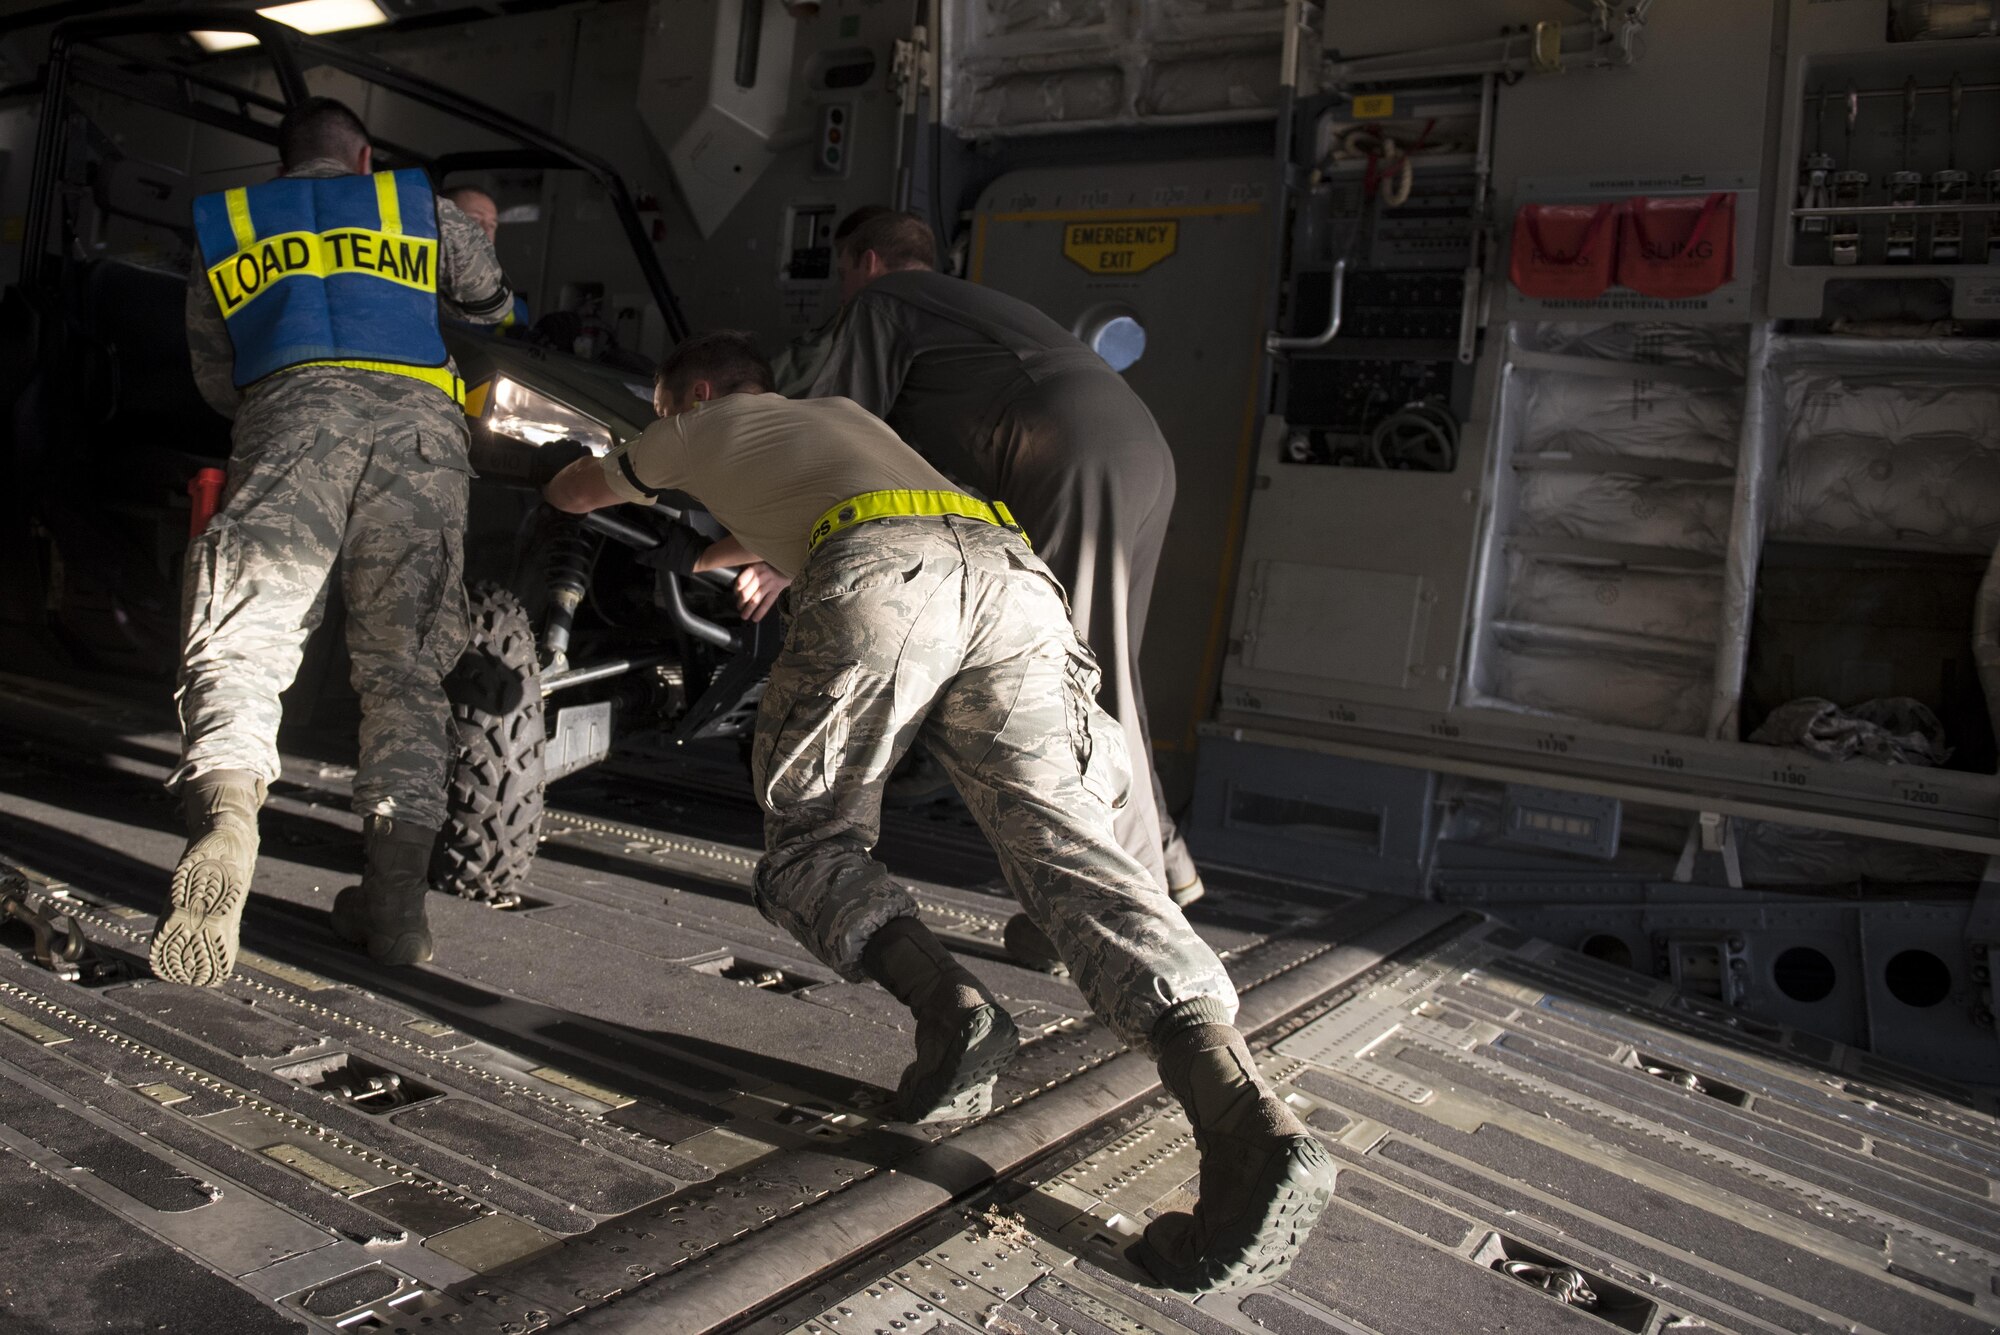 Loadmasters from the 6th Airlift Squadron and 305th Aerial Port Squadron secure an all-terrain vehicle on board a C-17 Globemaster III at Joint Base McGuire-Dix-Lakehurst, N.J., Oct. 3, 2016. The aircraft, with personnel and equipment from the 621st Contingency Response Wing, is bound for Haiti in response to Hurricane Matthew. The 621st Contingency Response Wing has units continuously on alert and ready to deploy anywhere in the world in support of emergency operations, such as hurricane relief, within 12 hours of notification.